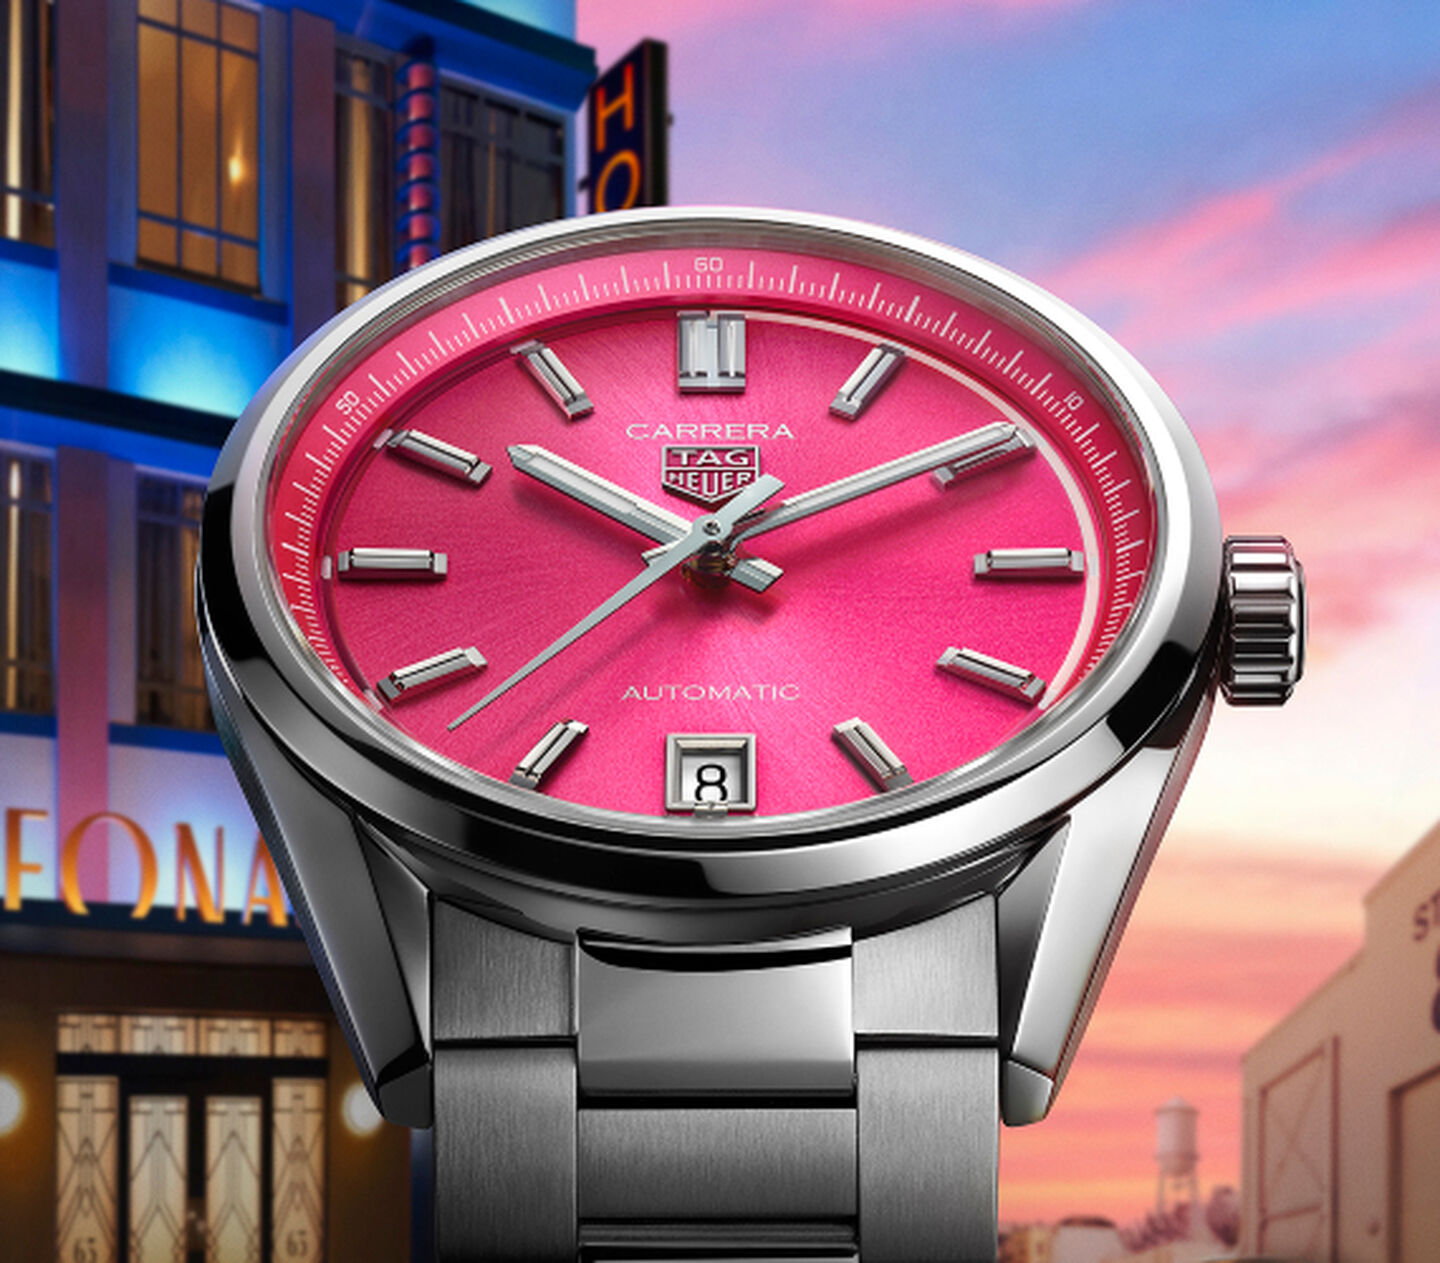 A women's TAG Heuer Carrera watch with a pink dial